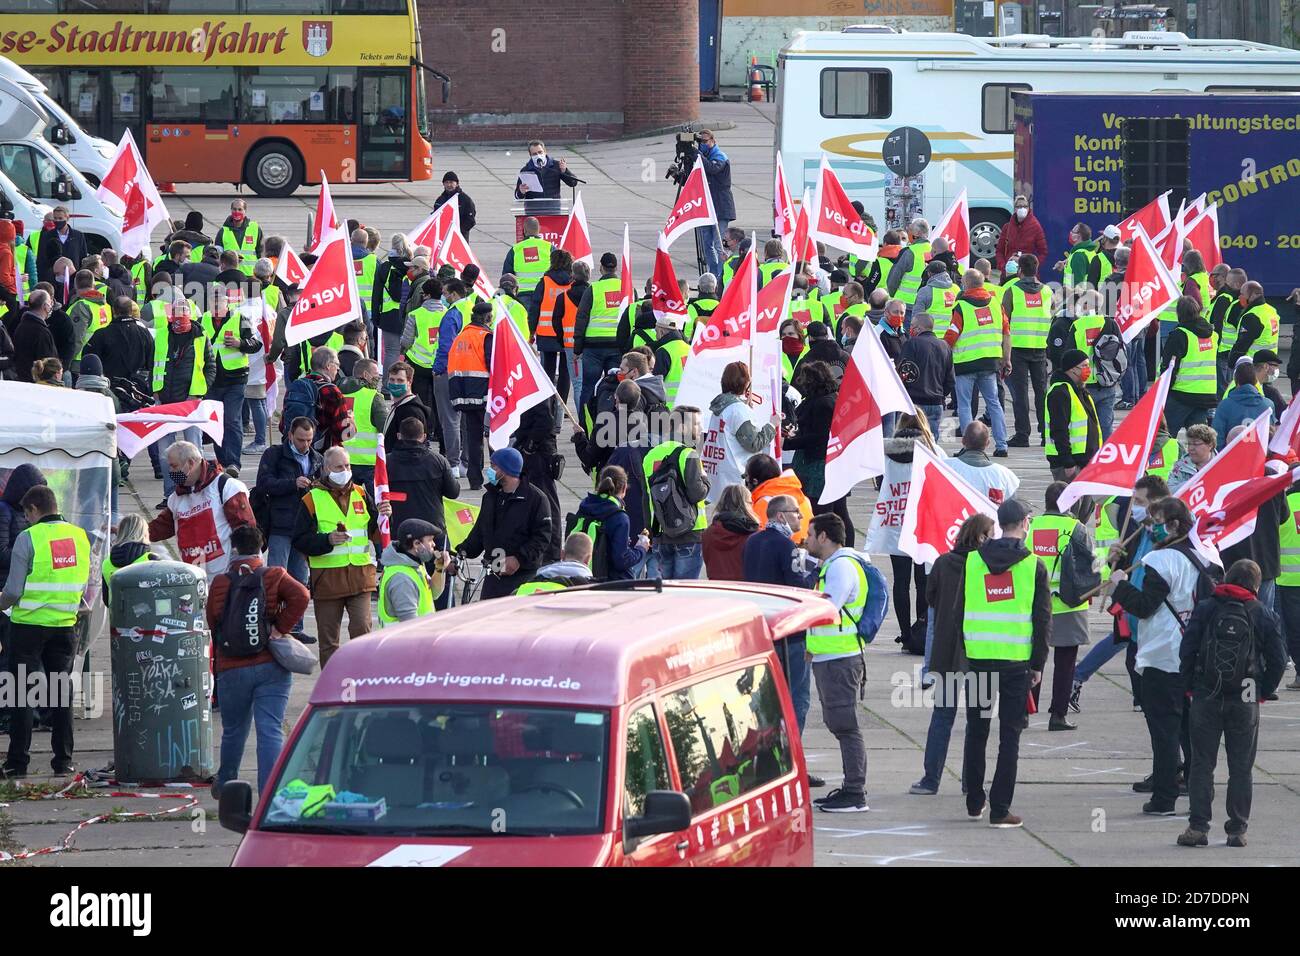 22 October 2020, Hamburg: Participants stand together at a rally in the  fish market as part of a warning strike by the trade union Verdi. The Verdi  union has called on public